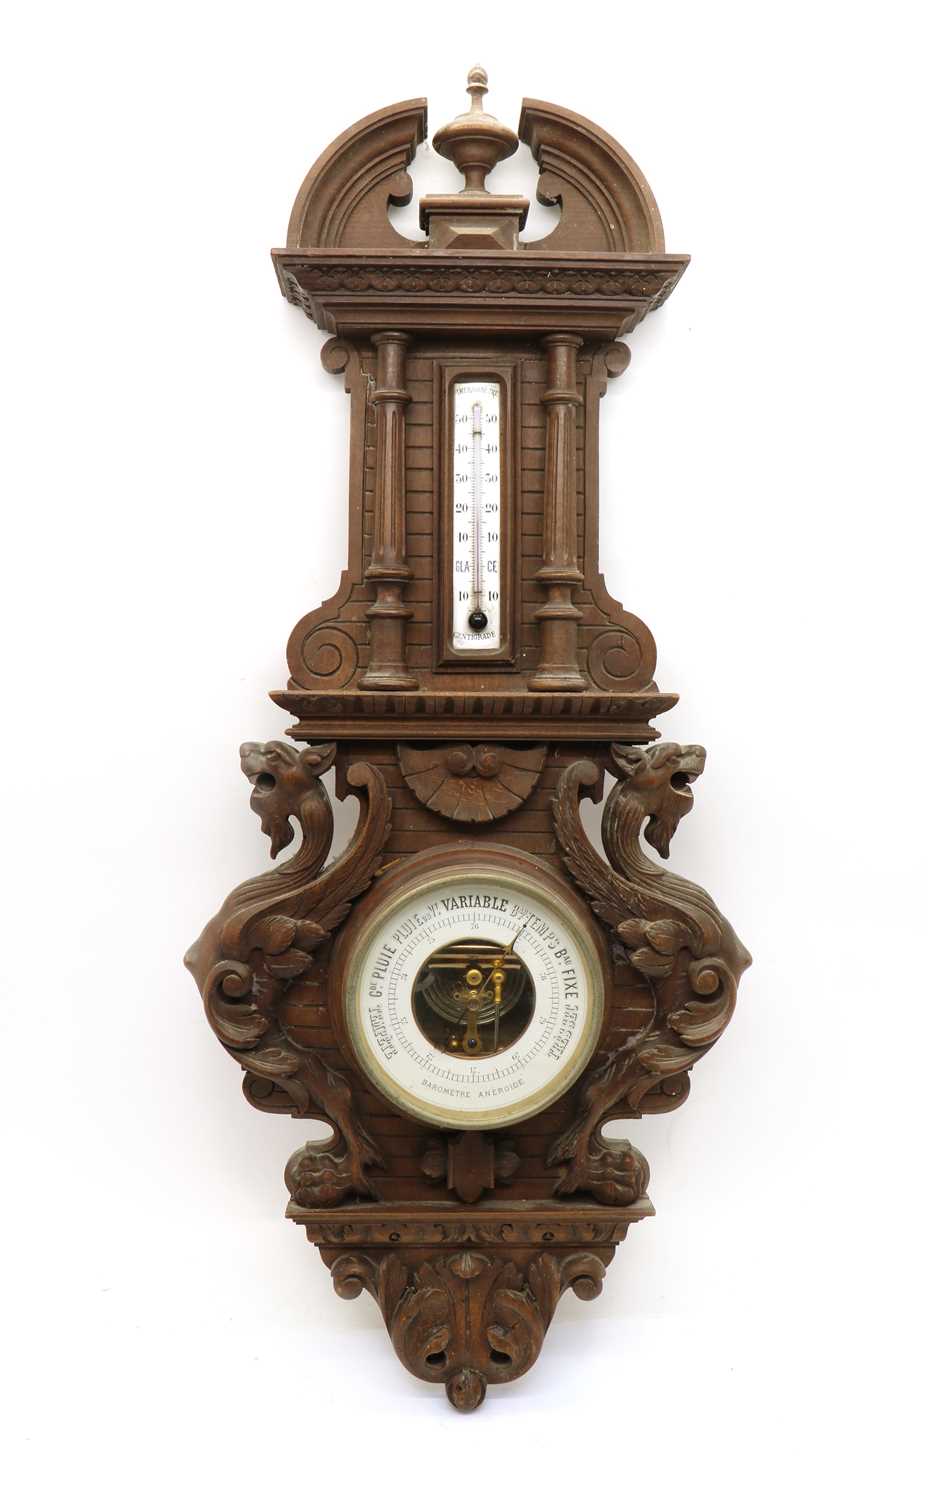 An early 20th century French aneroid barometer